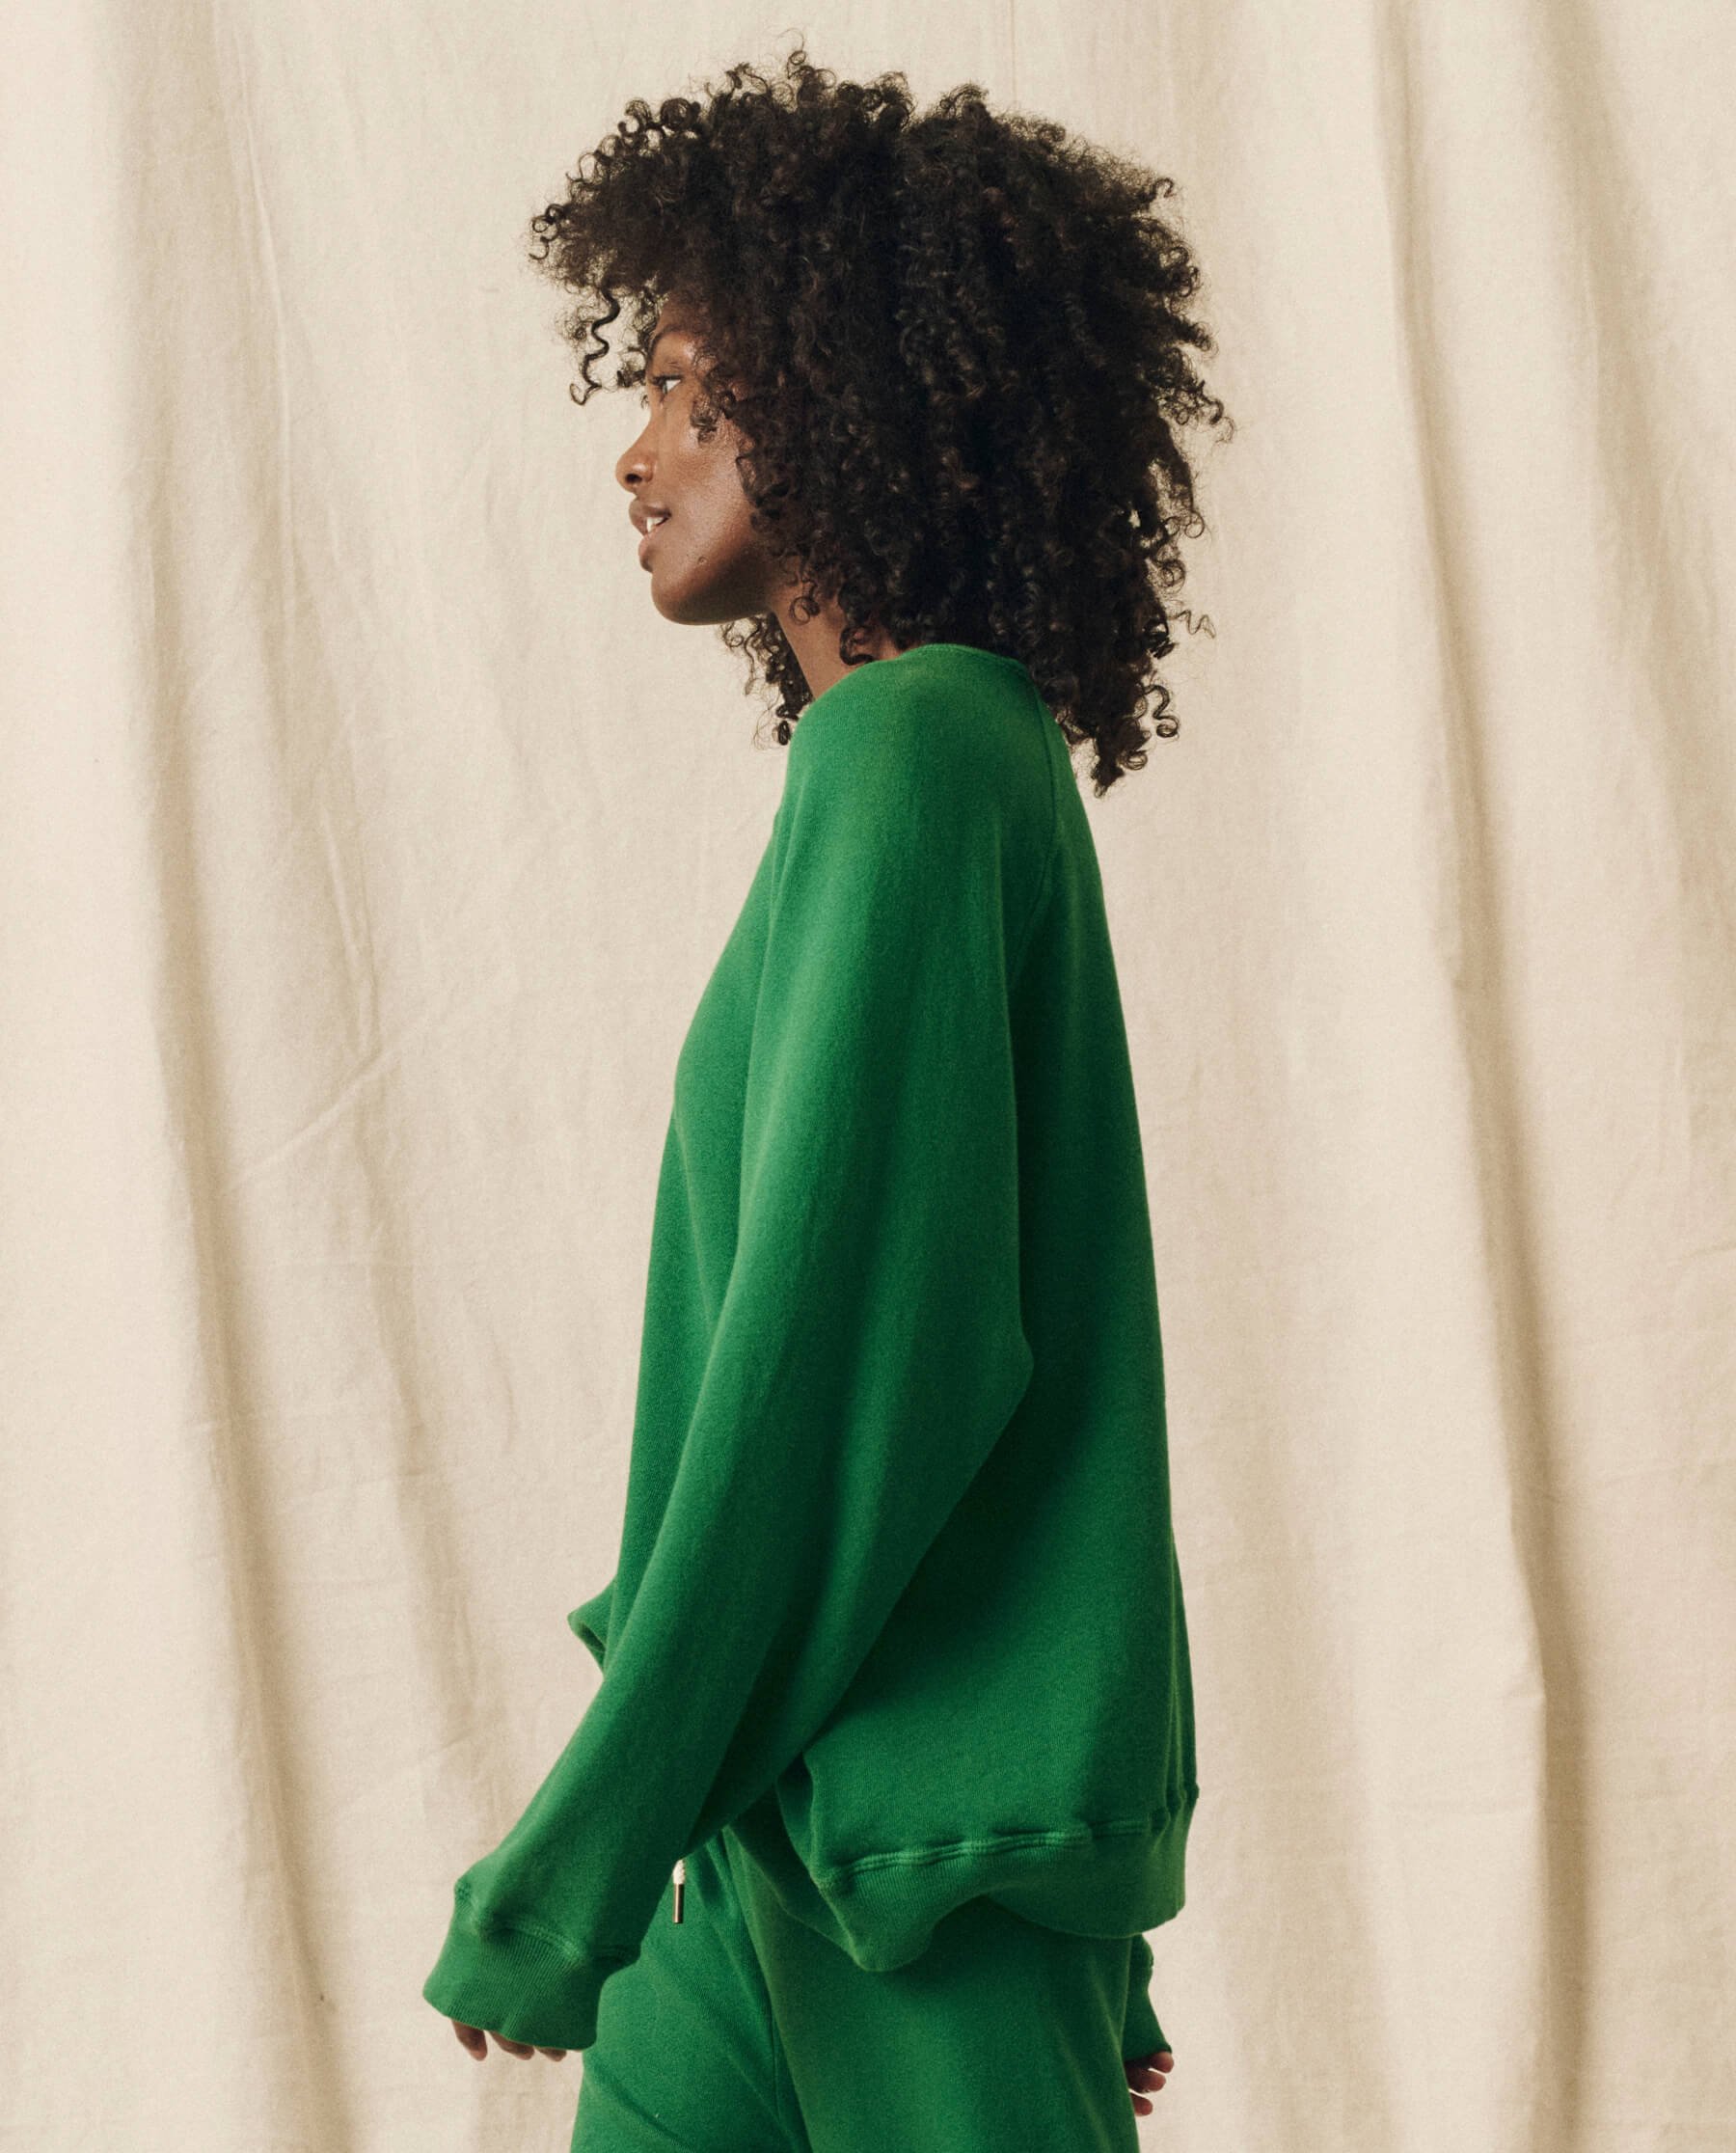 The Slouch Sweatshirt. Solid -- Holly Leaf